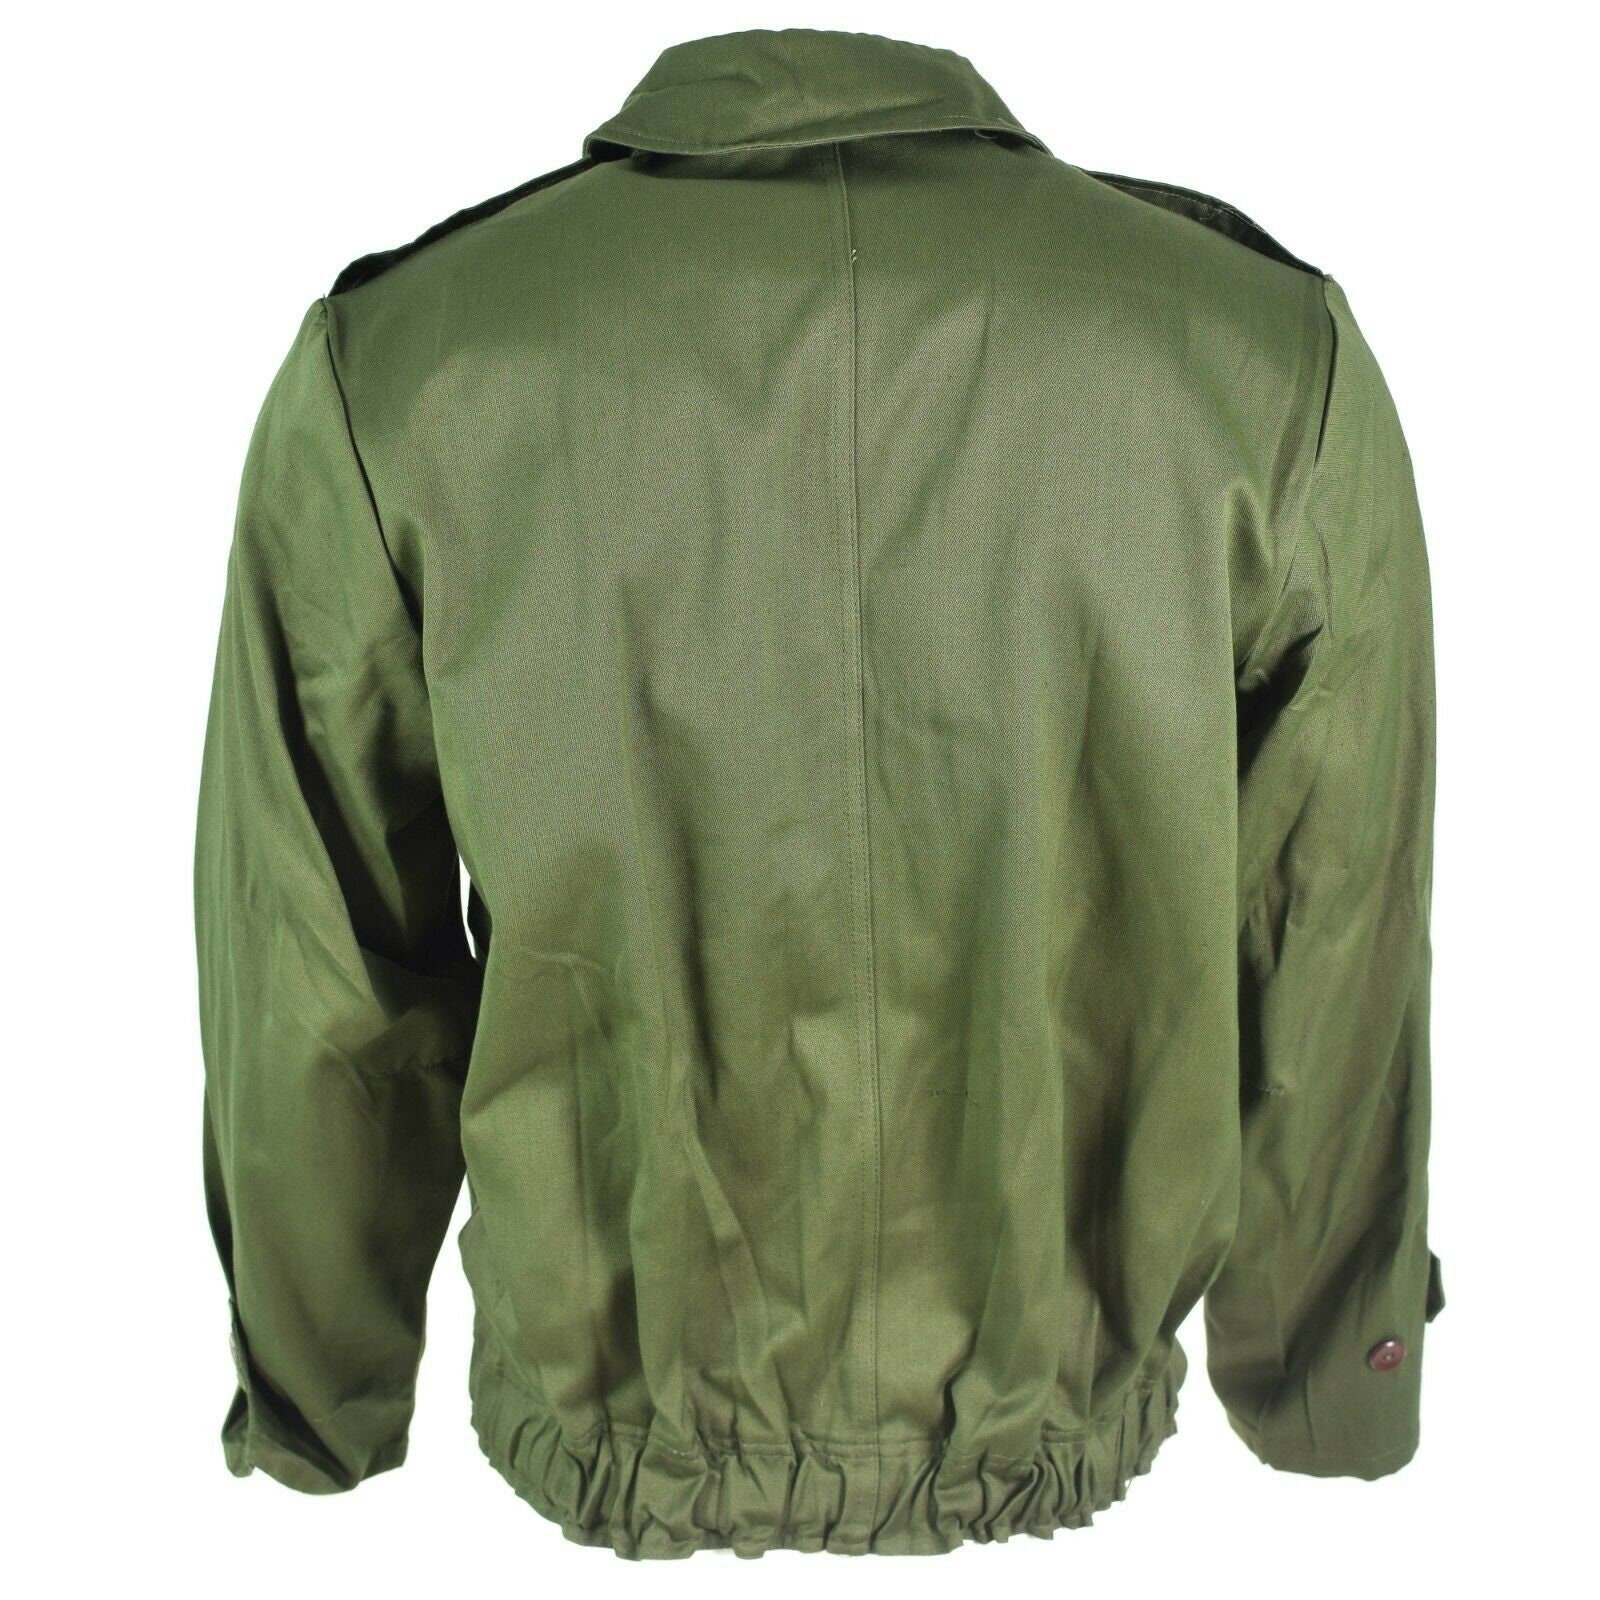 Original Hungarian army green jacket air force combat military issue NEW